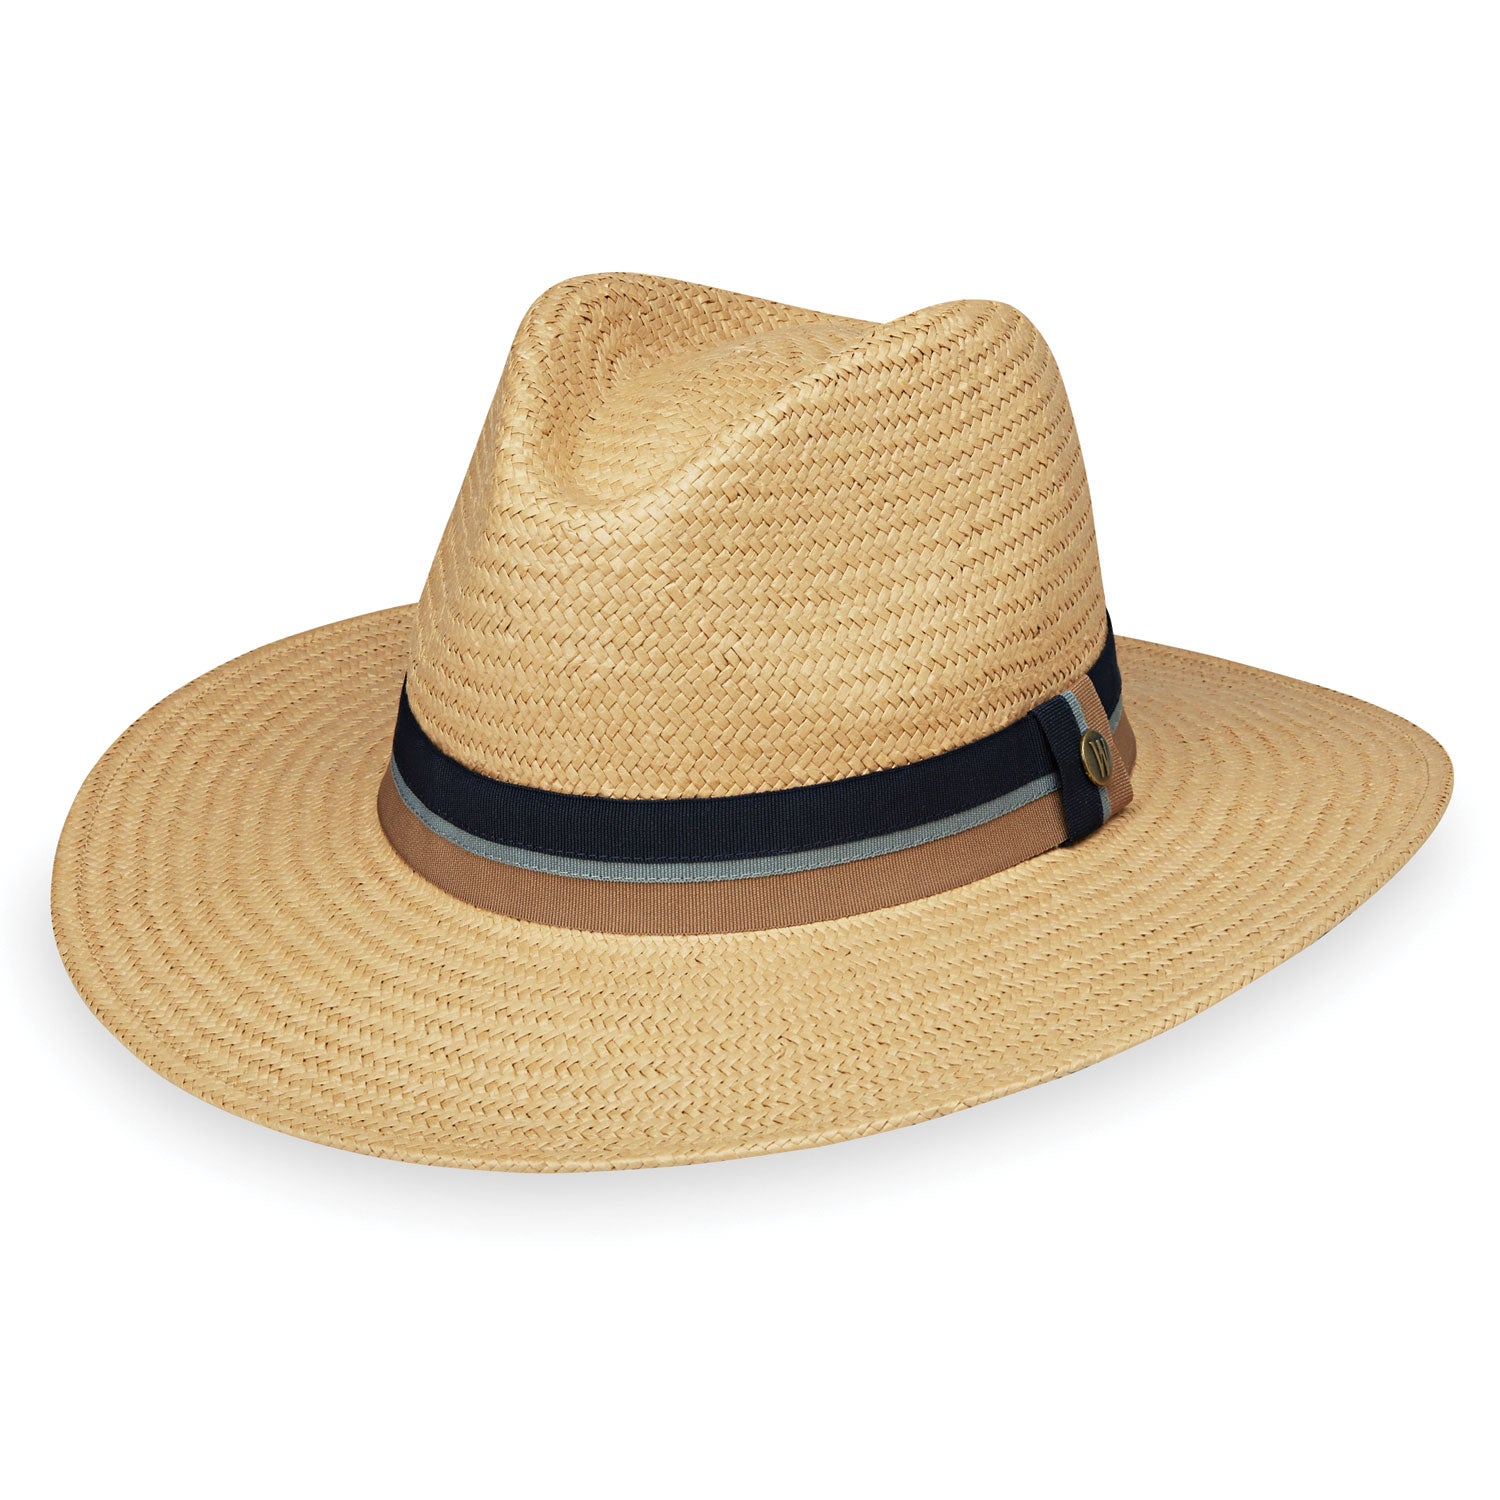 Featuring Front of Unisex Wide Brim Fedora Style Turner UPF Sun Hat in Camel from Wallaroo